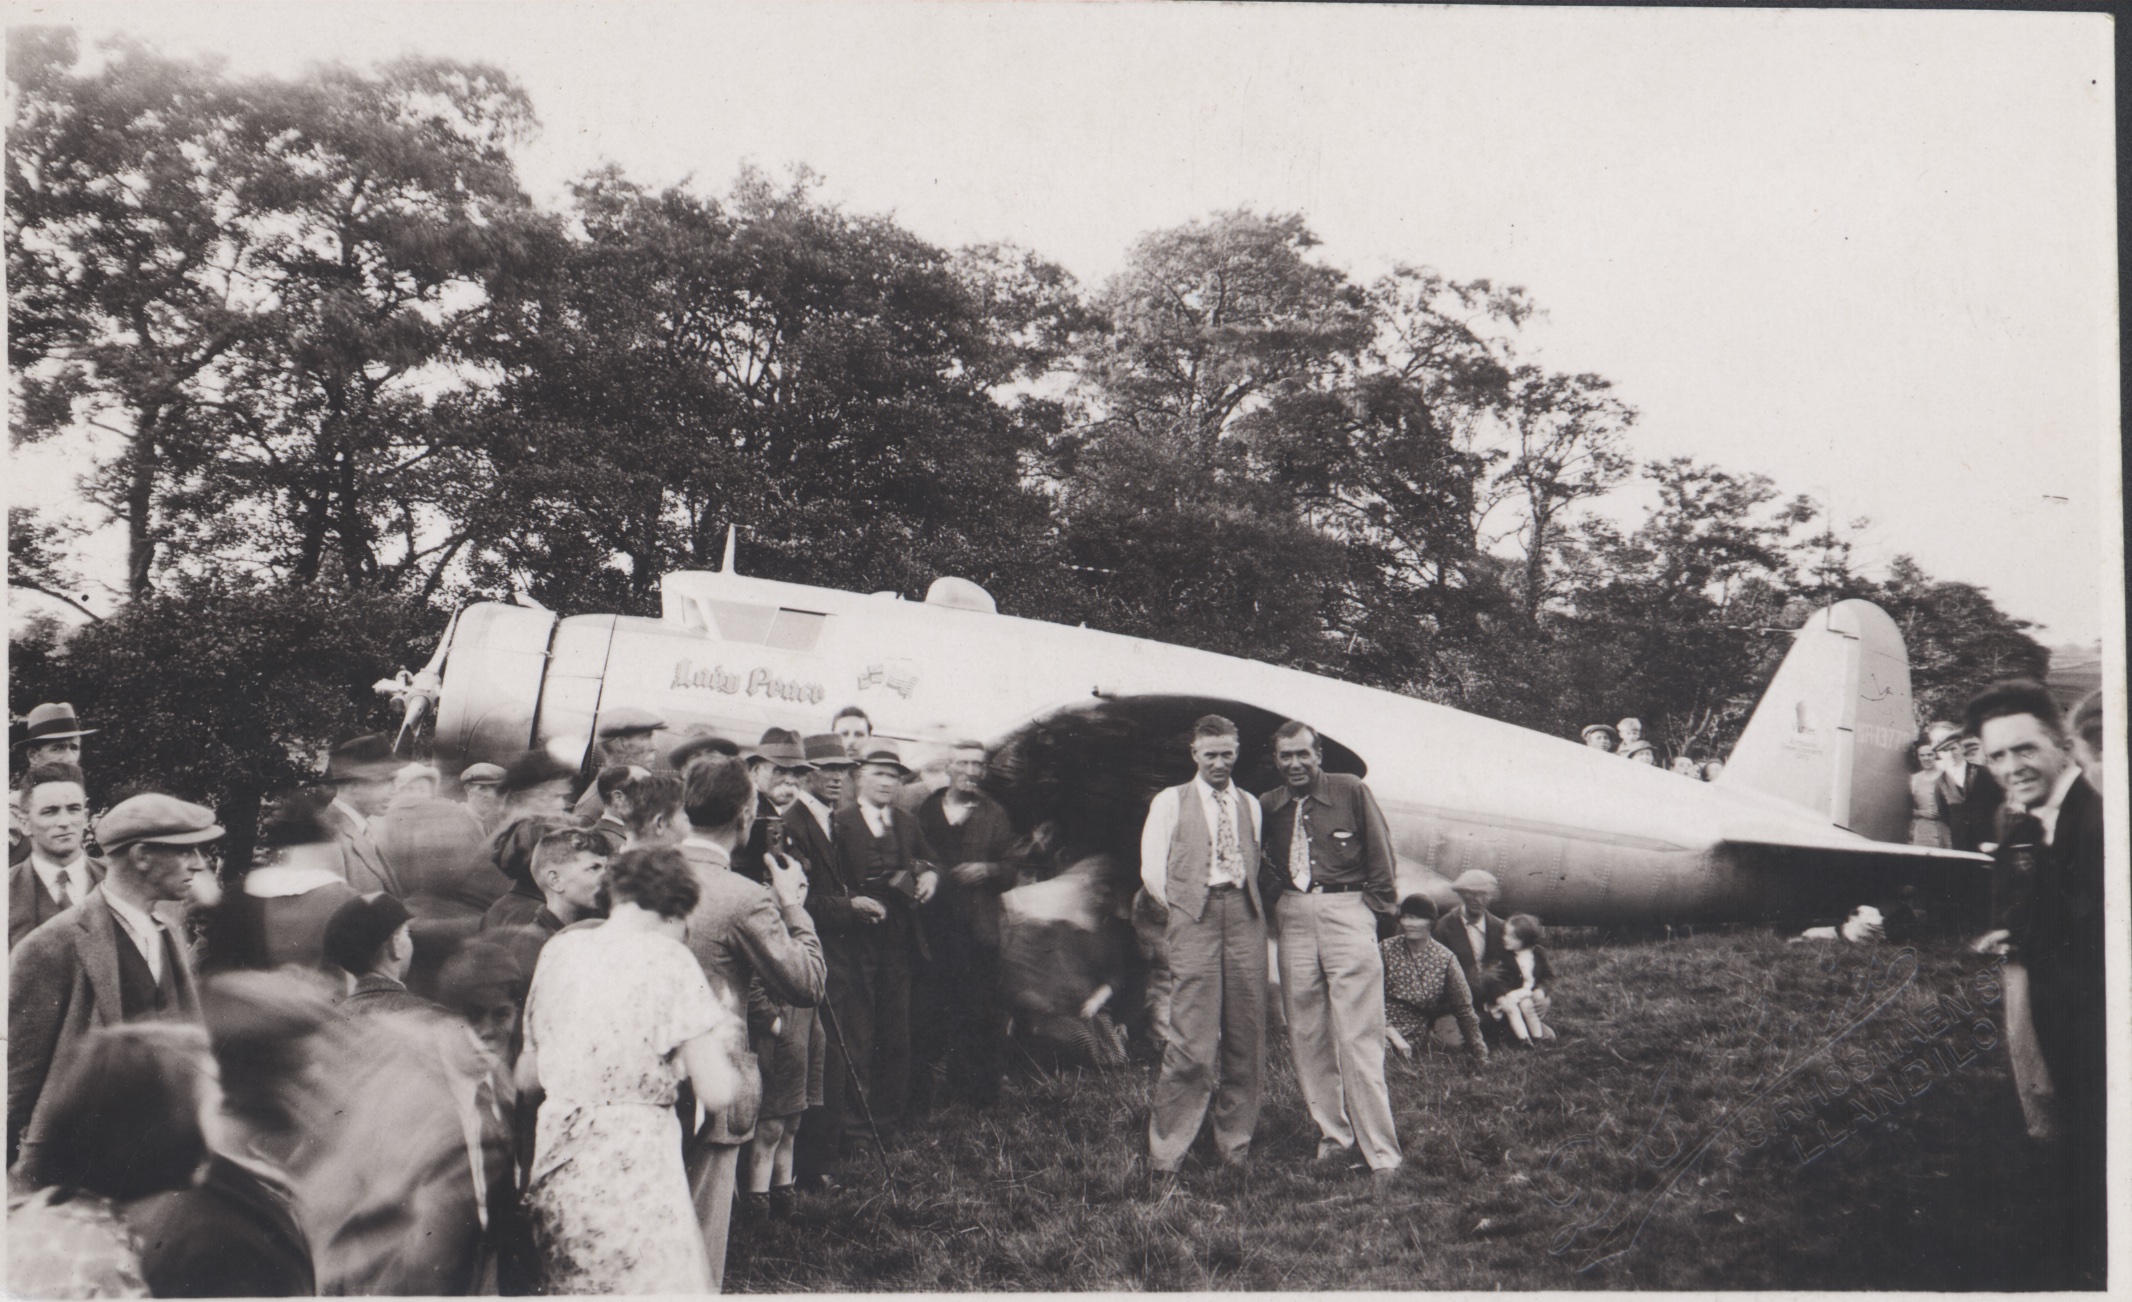 Black and white photograph of a crowd forming around an aeroplane (the Lady Peace), with two men front and centre.